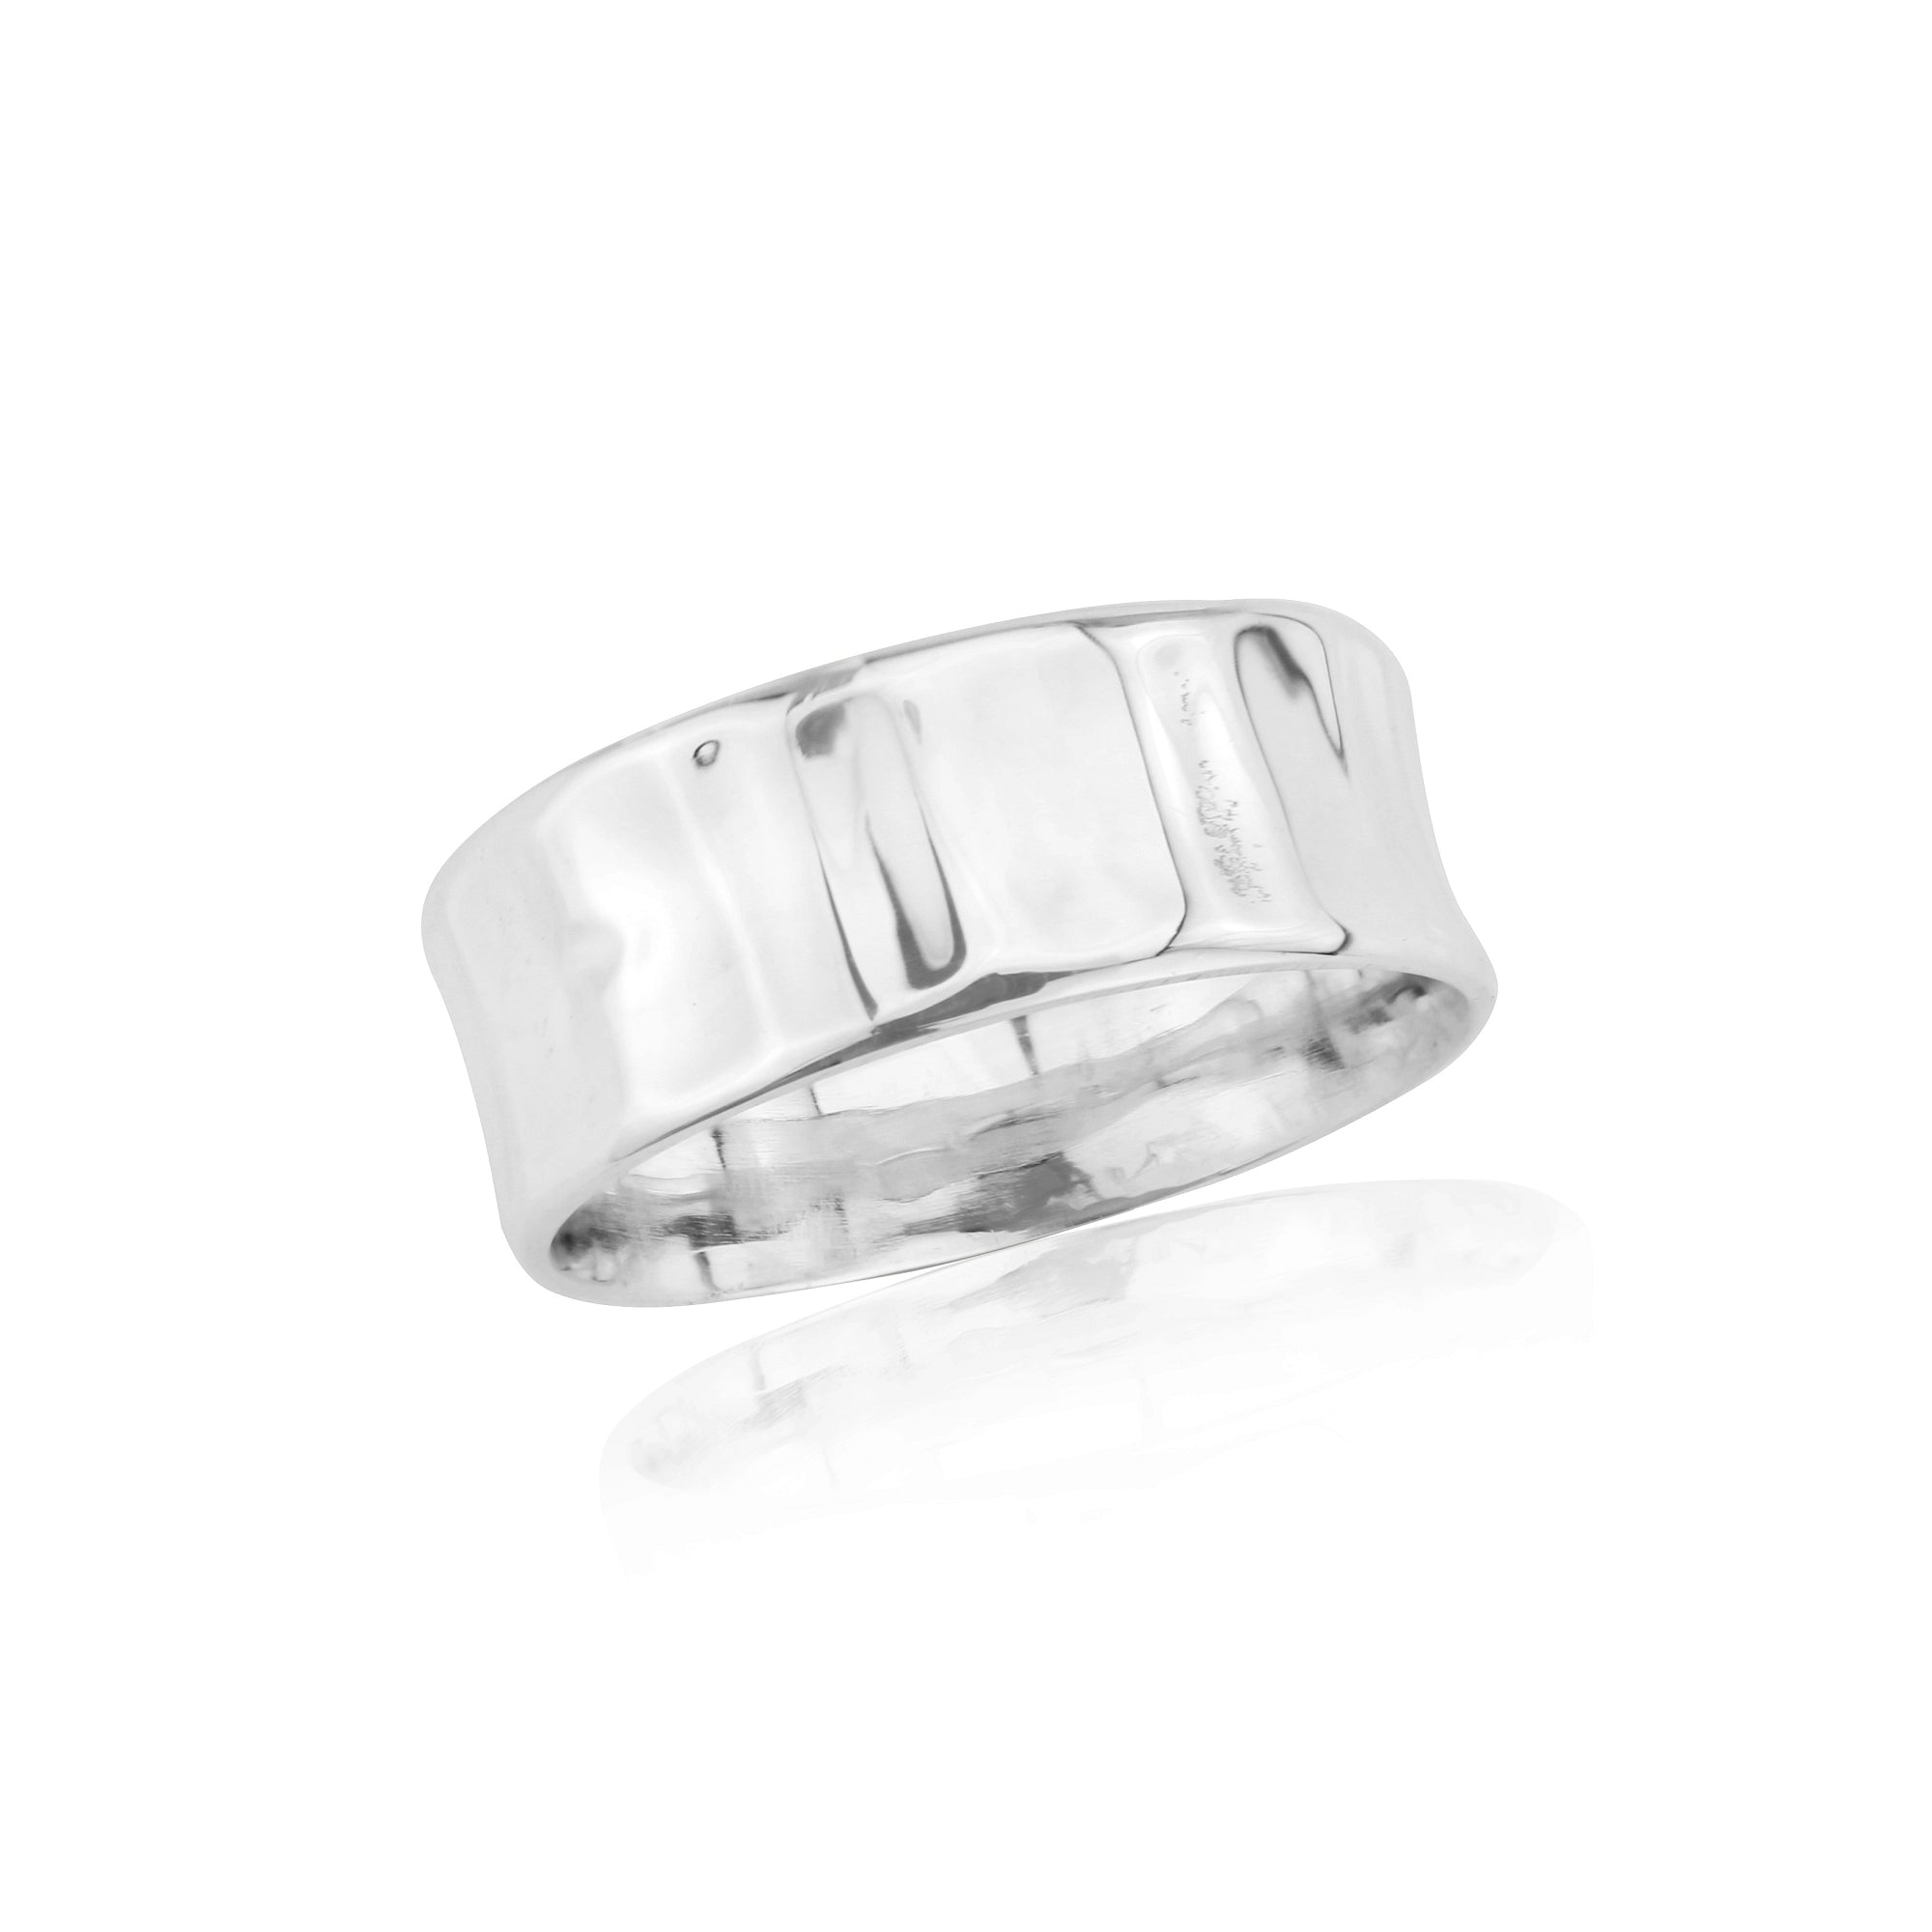 Handmade Silver Hammered Ring 12 mm in Thickness